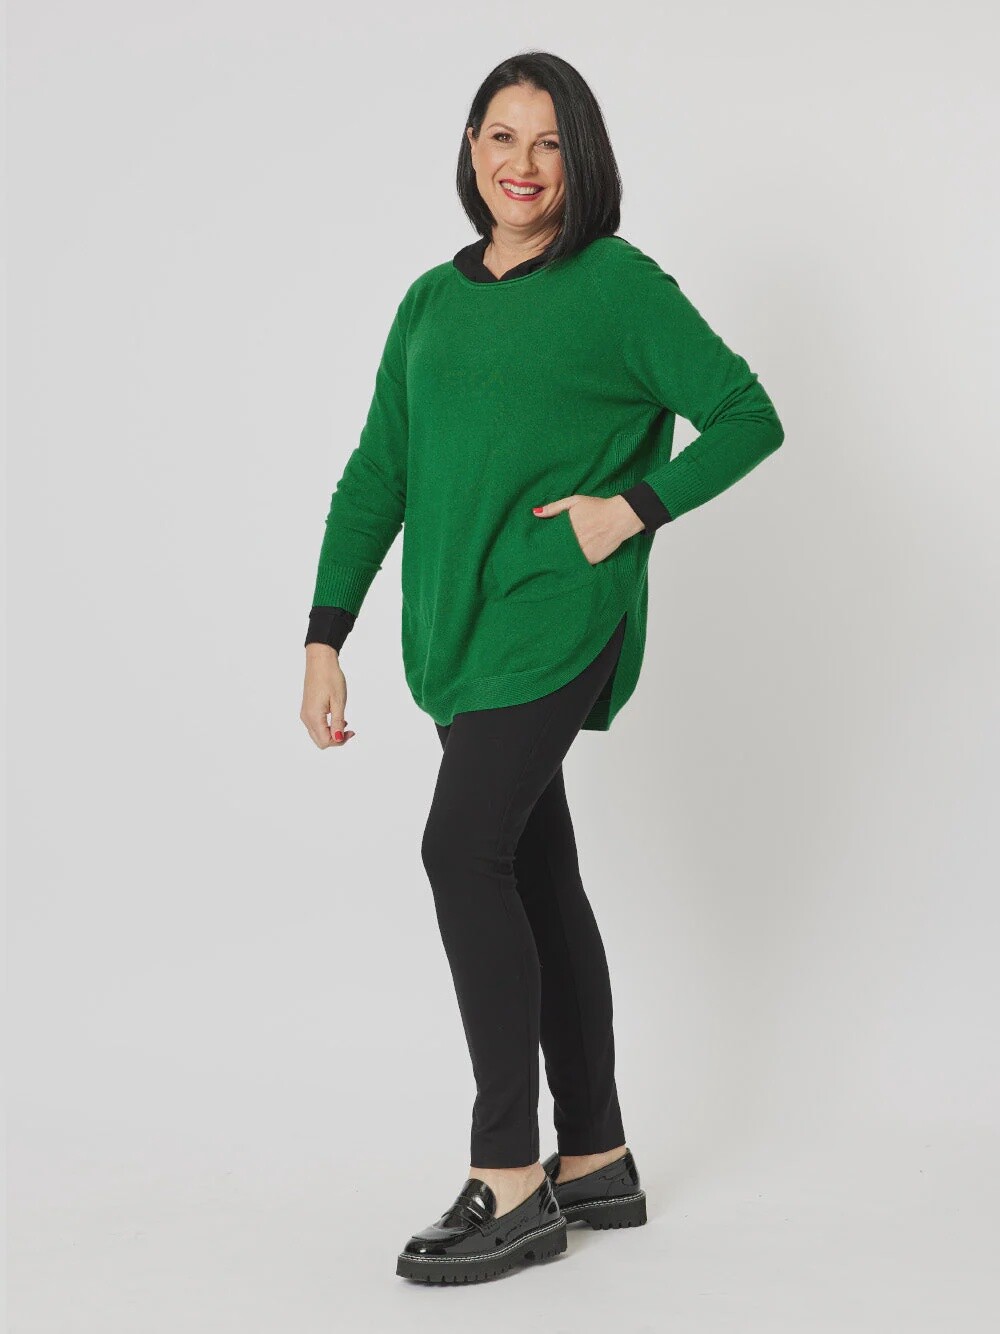 Clarity - Pia Button Back Knit Emerald - 45292, Size: 10